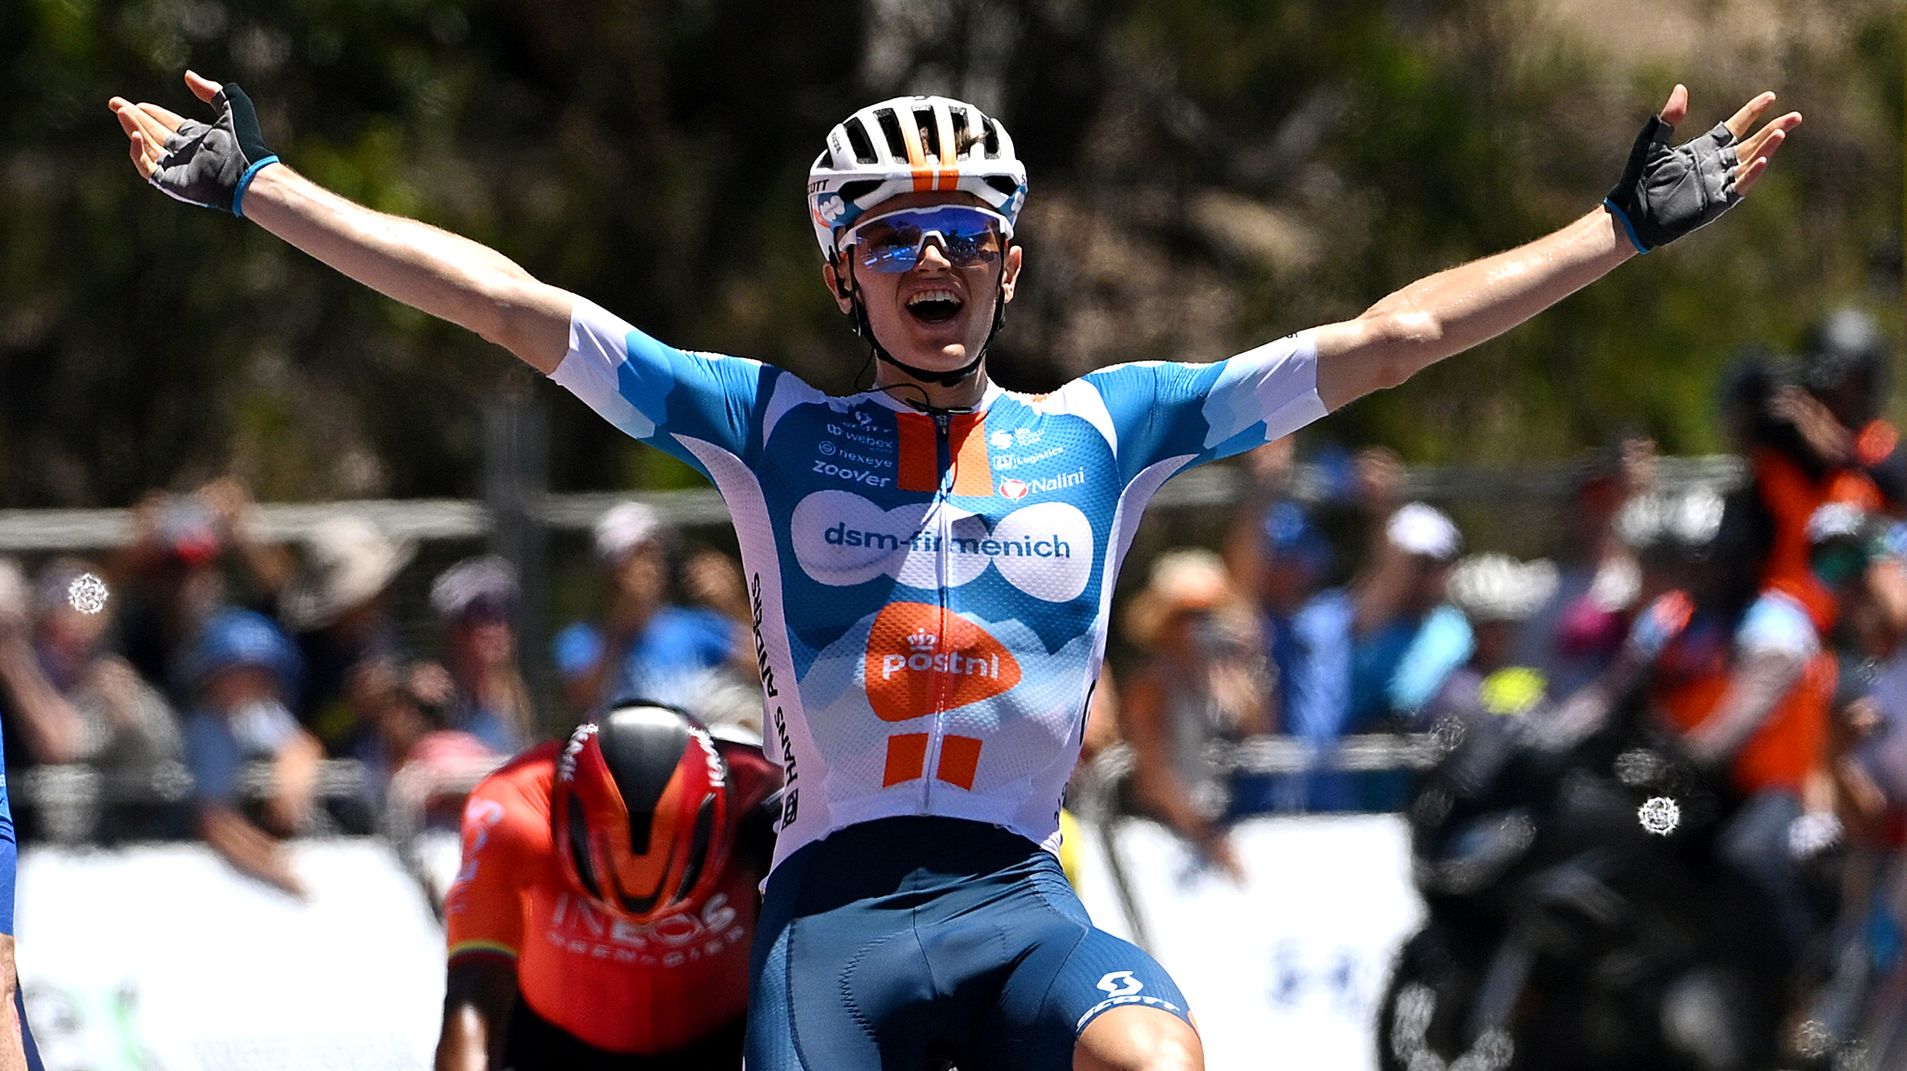 Oscar Onley of United Kingdom and Team dsm-firmenich PostNL celebrates at finish line as stage winner ahead of Stephen Williams of United Kingdom and Team Israel - Premier Tech and Jhonatan Narvaez of Ecuador and Team INEOS Grenadiers during the 24th Santos Tour Down Under 2024, Stage 5 a 129.3km stage from Christies Beach to Willunga Hill 372m.